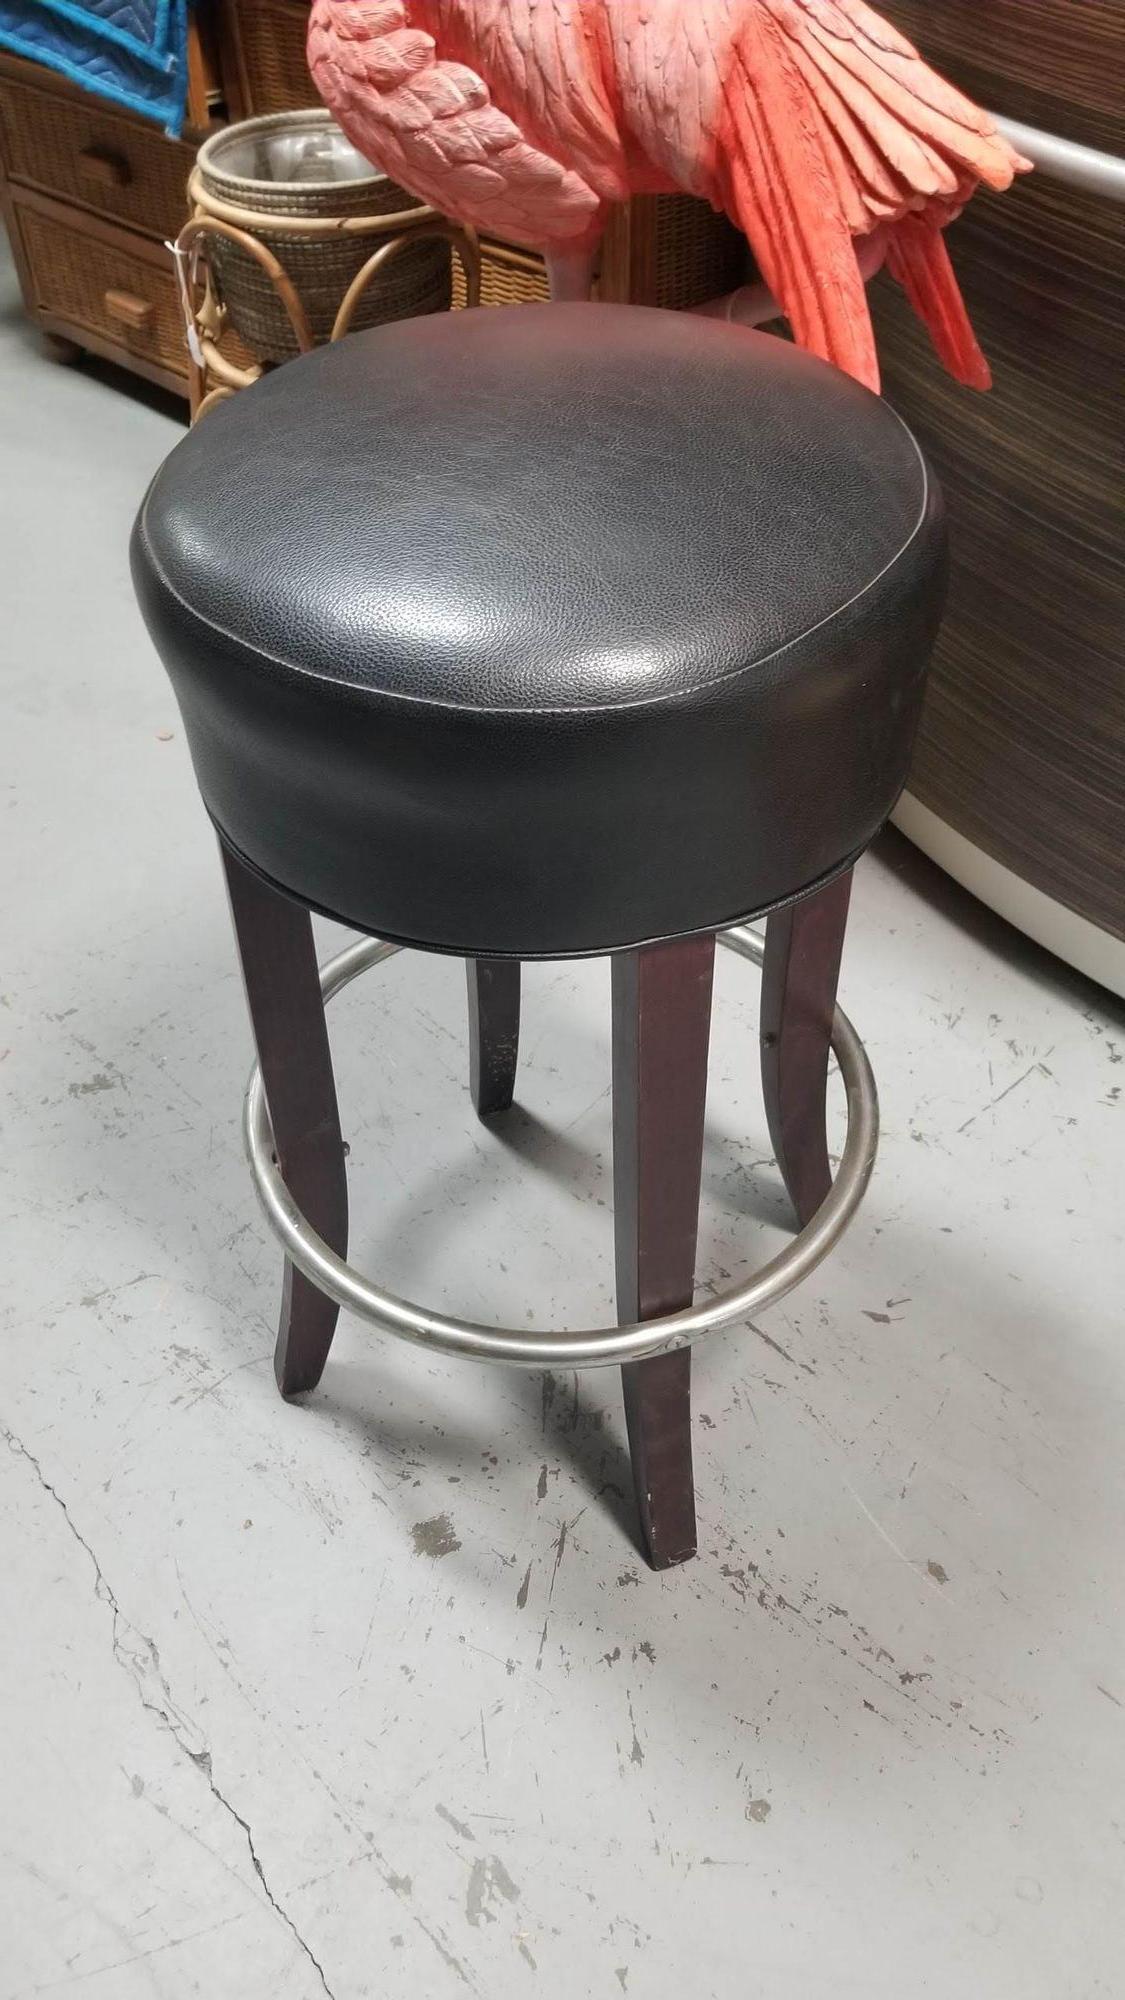 Black Leather Bar Stools with Chrome Foot Rests In Excellent Condition For Sale In Van Nuys, CA